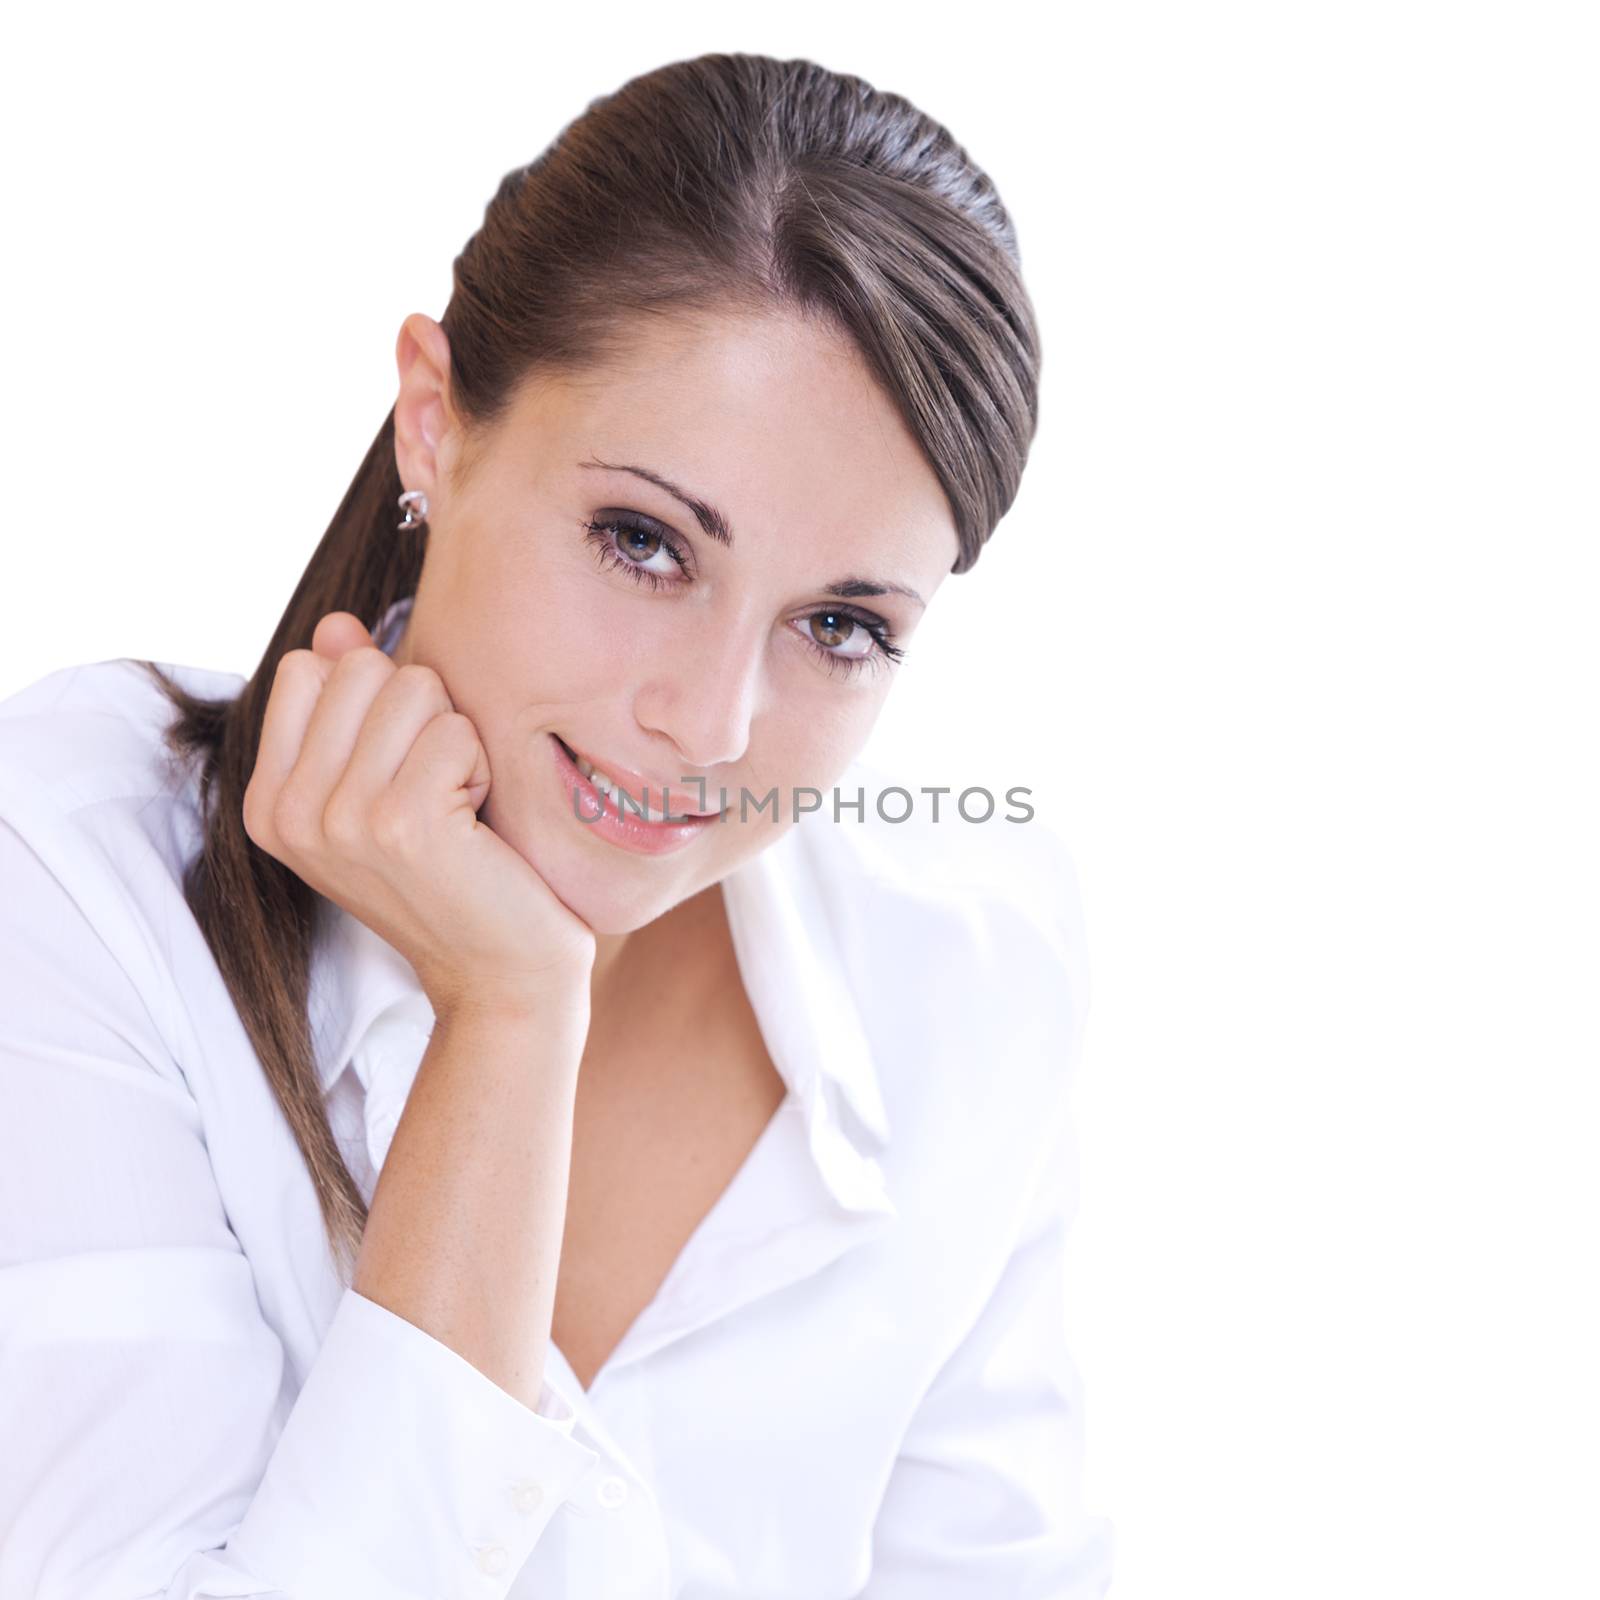 Attractive woman in white shirt with hand on chin looking at camera.